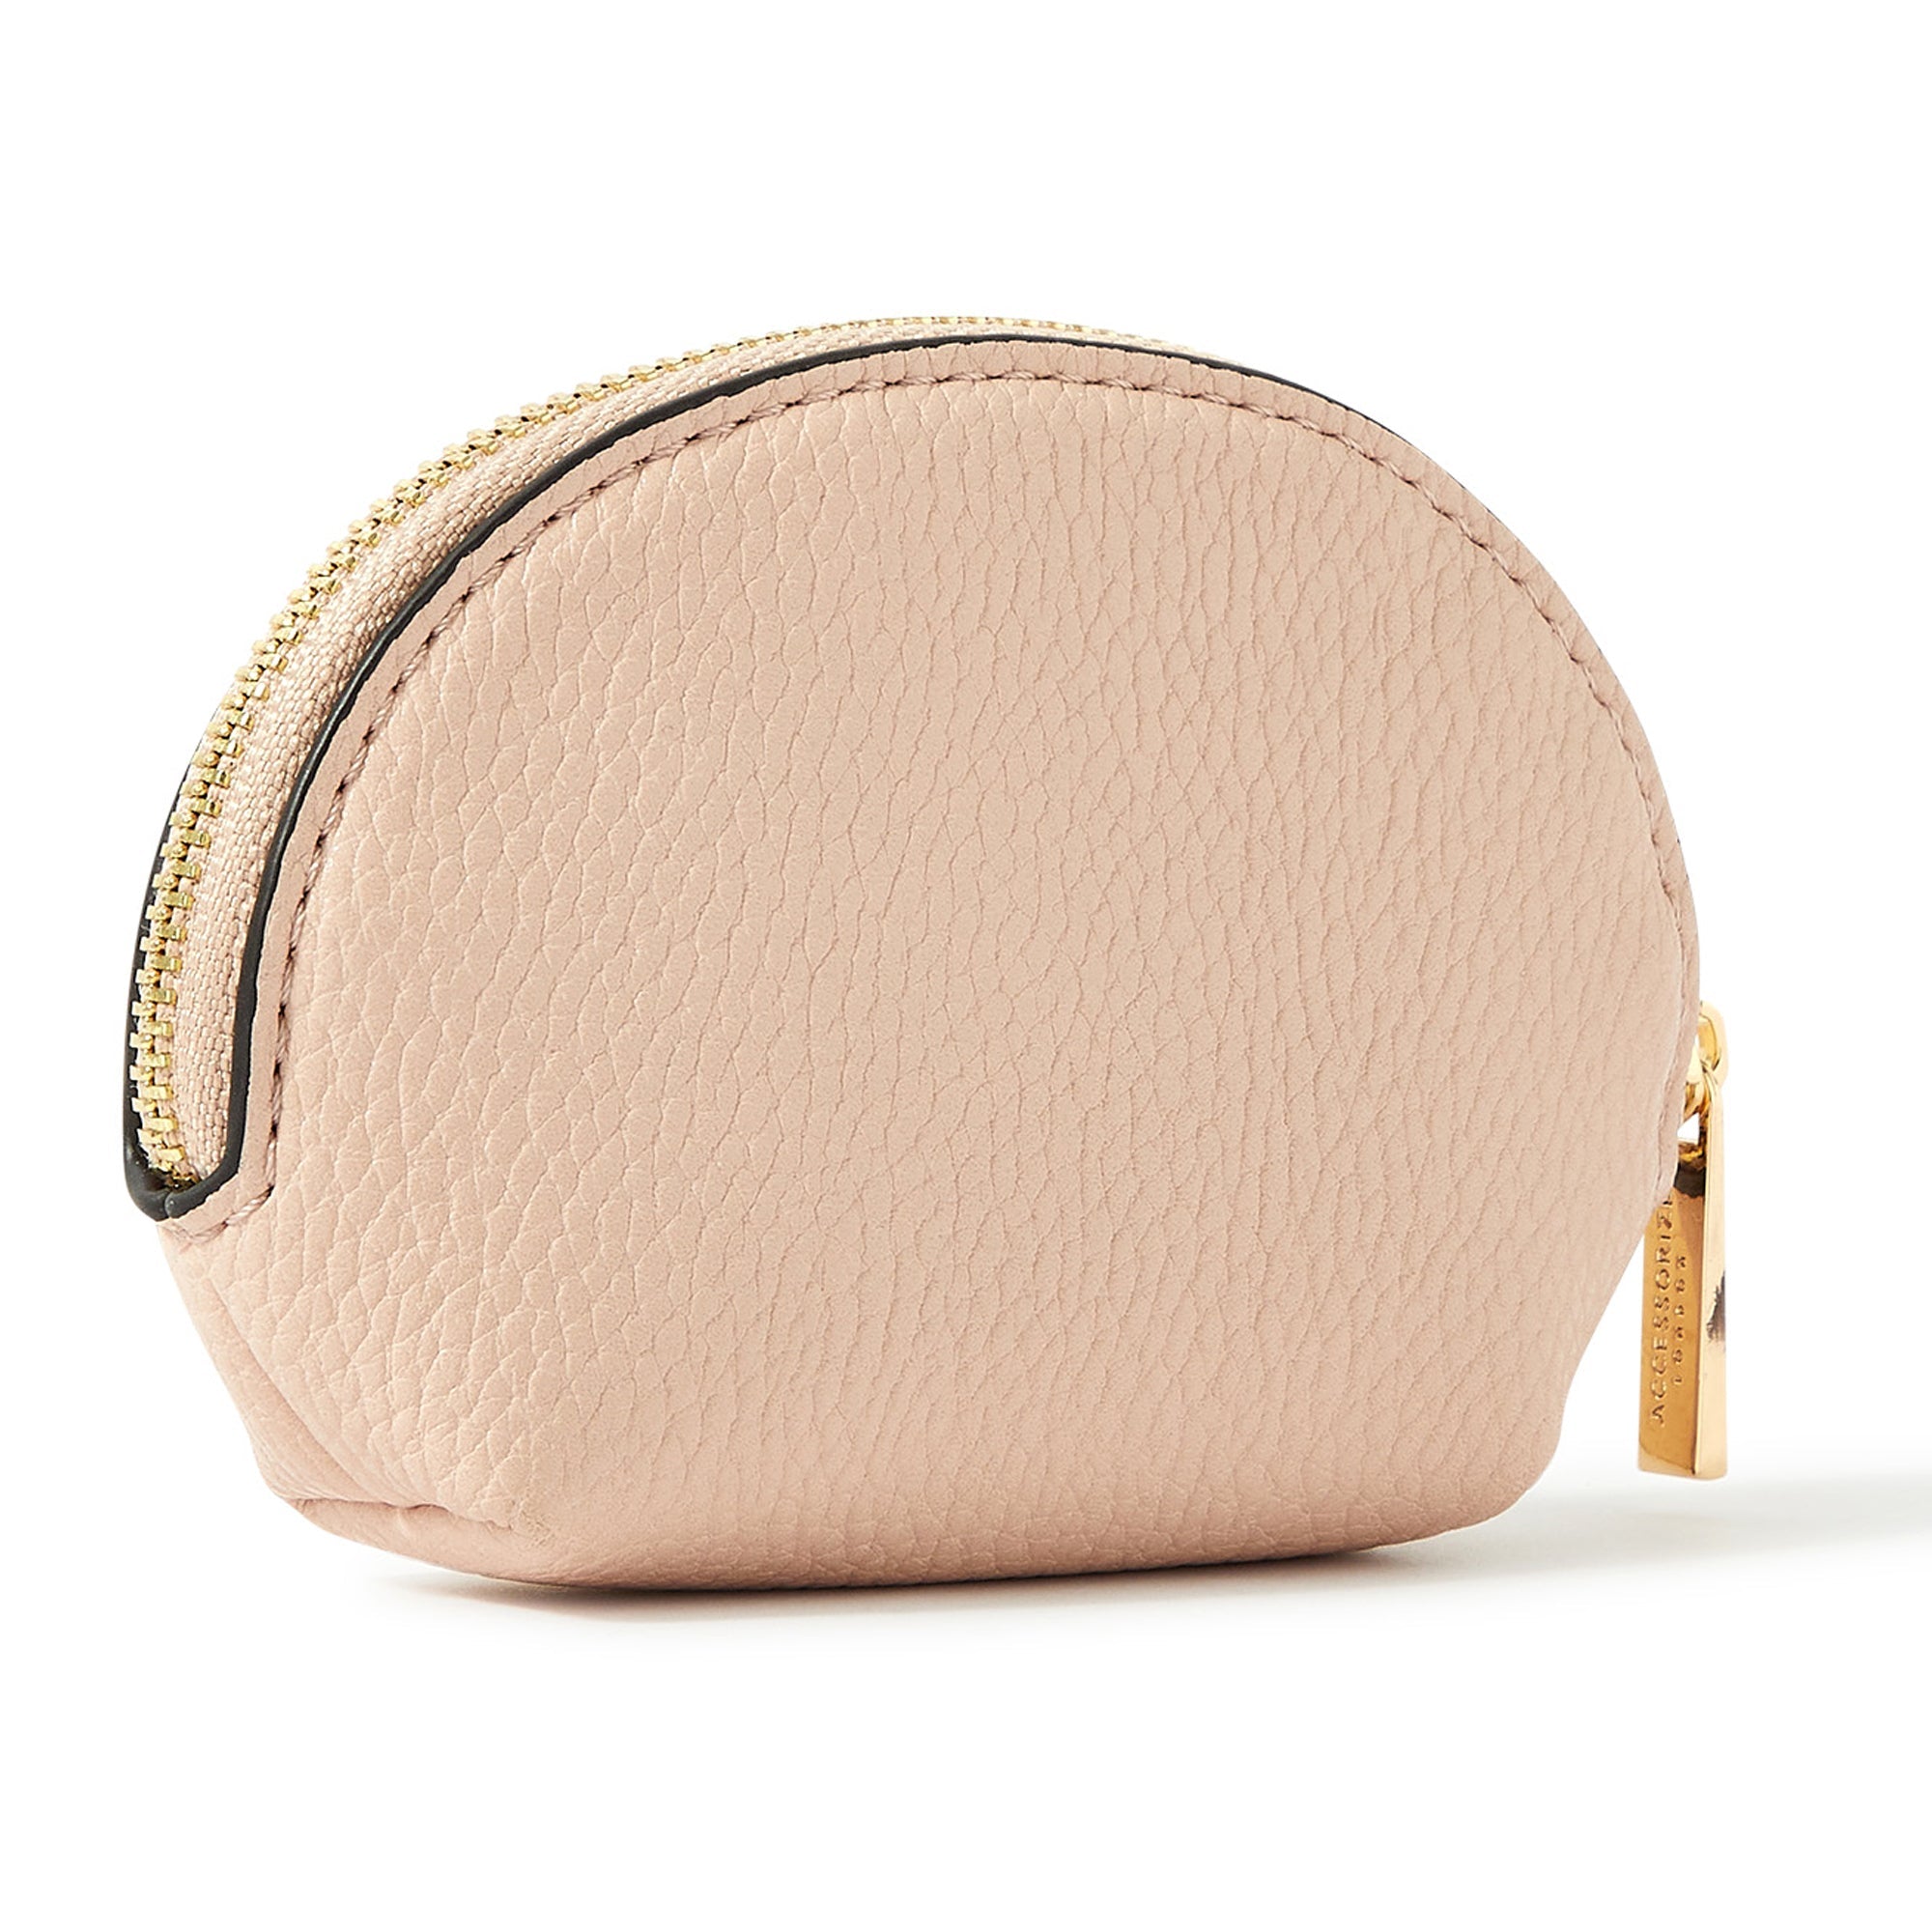 X Y SHOP Mini Backpack Coin Bag Women Small Wallet Fashion Pu Keychain Purses  Coin Purse Pink - Price in India | Flipkart.com